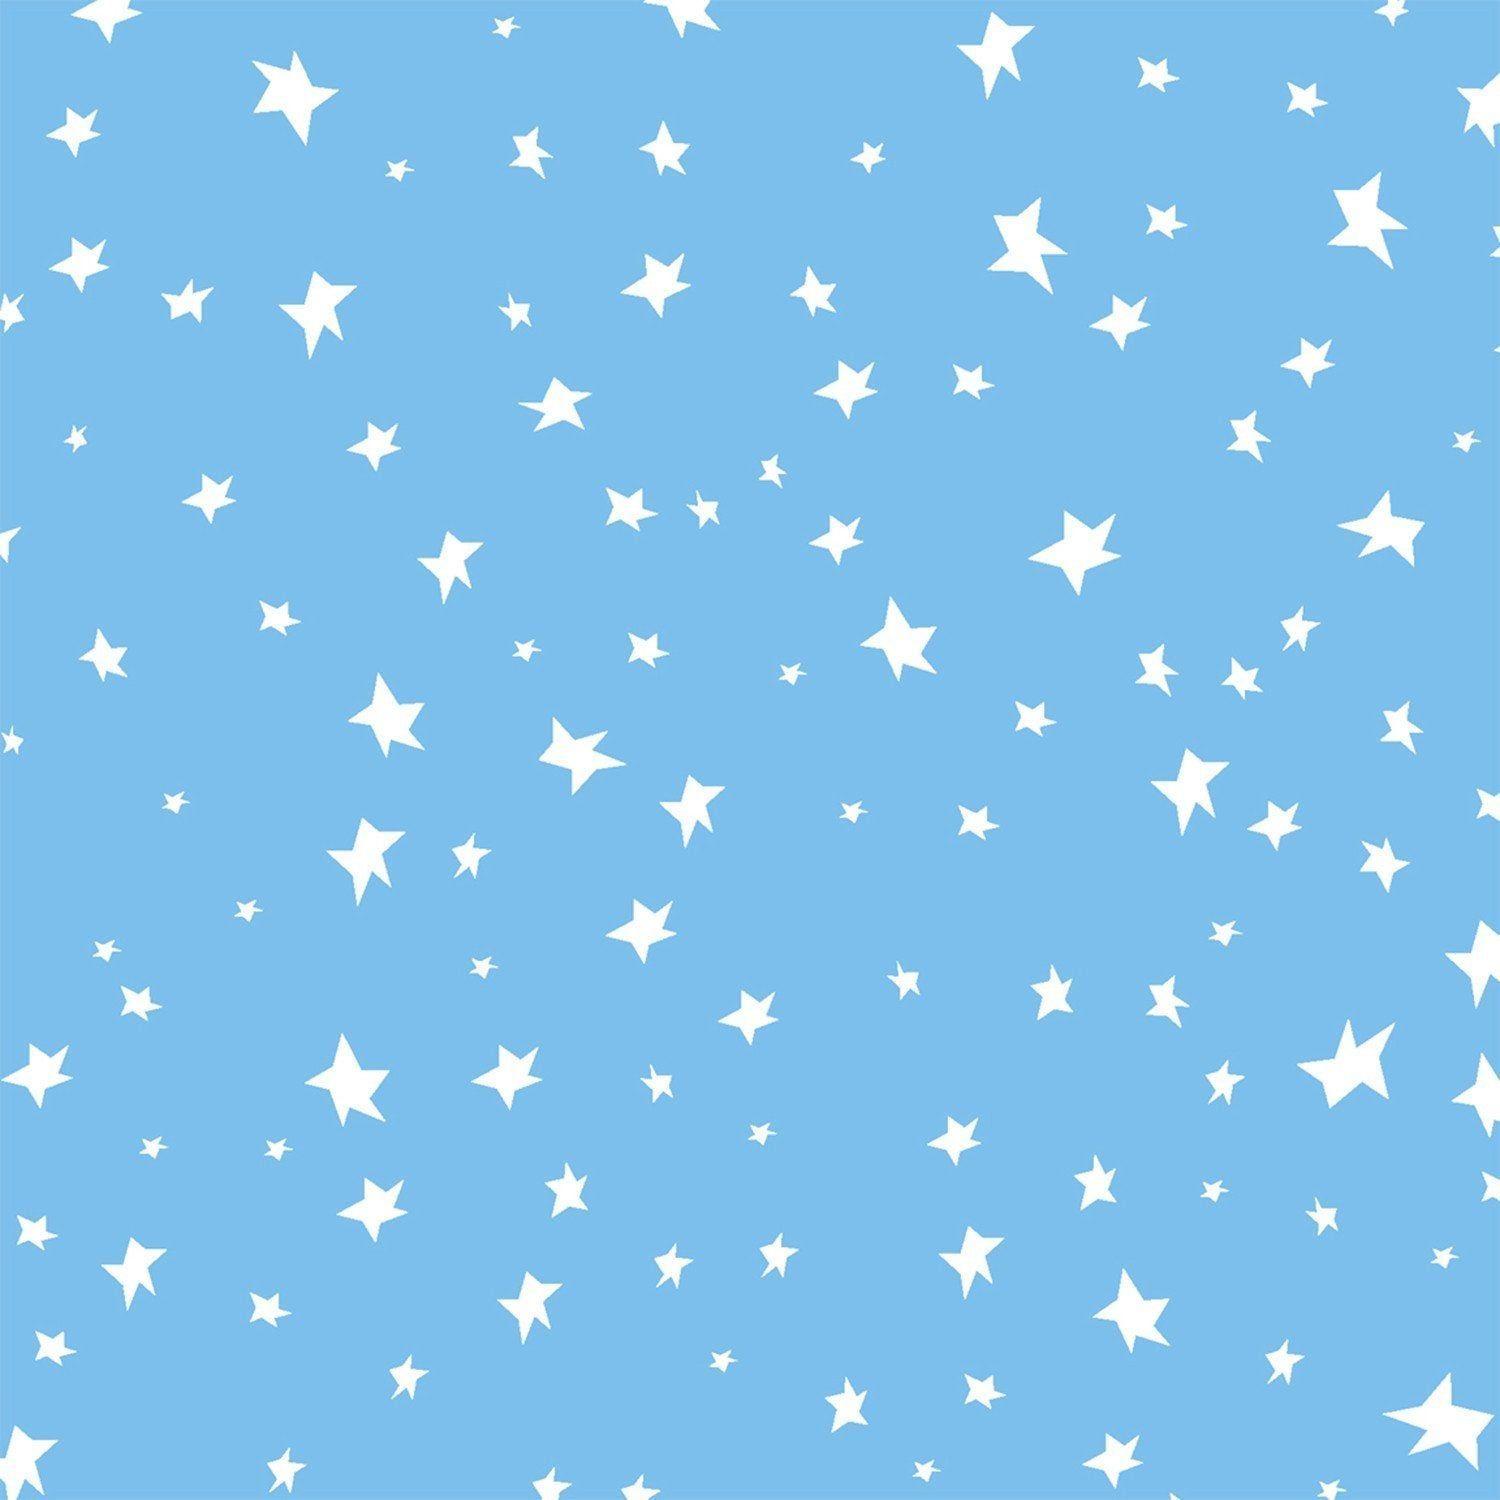 Download Let the Colorful Blue Stars Light up Your Day Wallpaper   Wallpaperscom